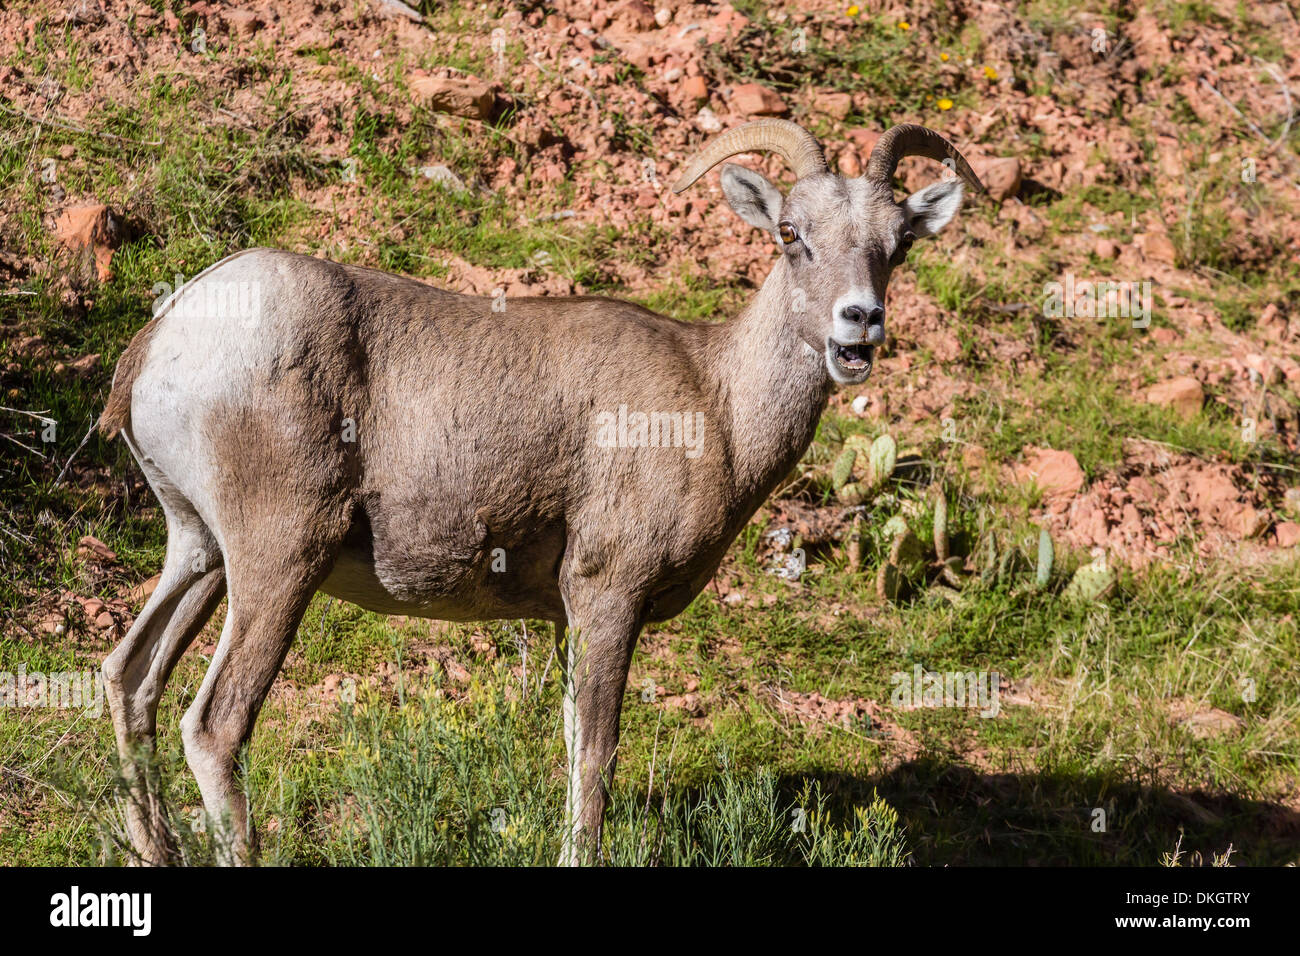 Adult desert bighorn sheep (Ovis canadensis), Zion National Park, Utah, United States of America, North America Stock Photo